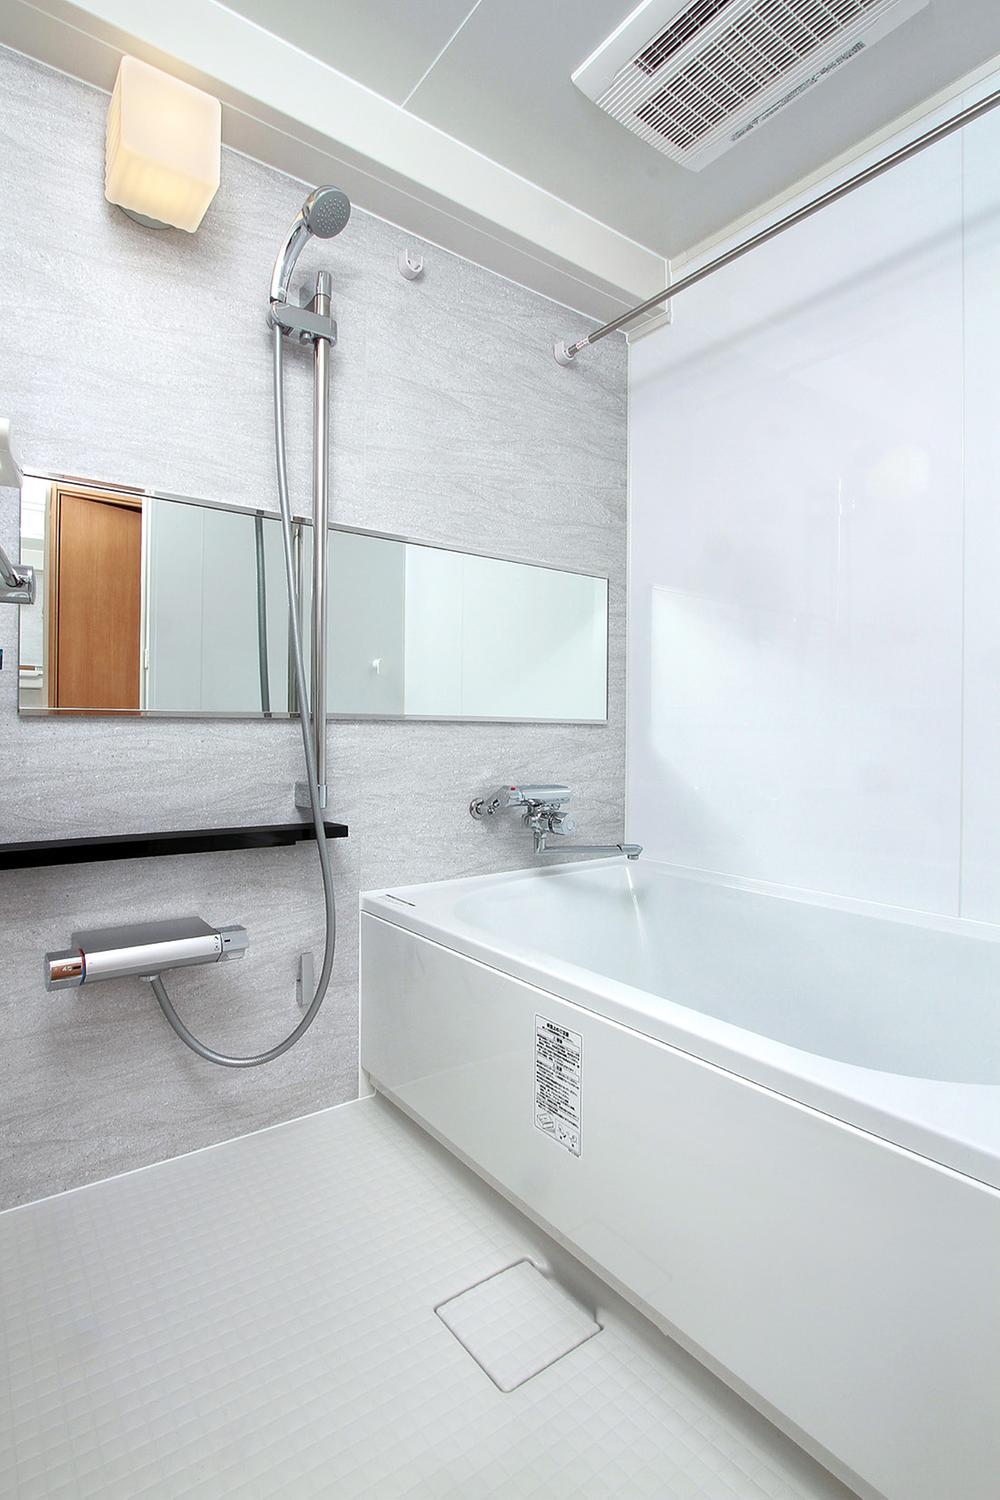 Bathroom.  [Bathroom] Adjustable slide bar shower head and Warm Thermo floor and enhance the specifications ... to the height of your choice! Water around the equipment is new goods exchange. (2013 / 8 / 8 shooting)